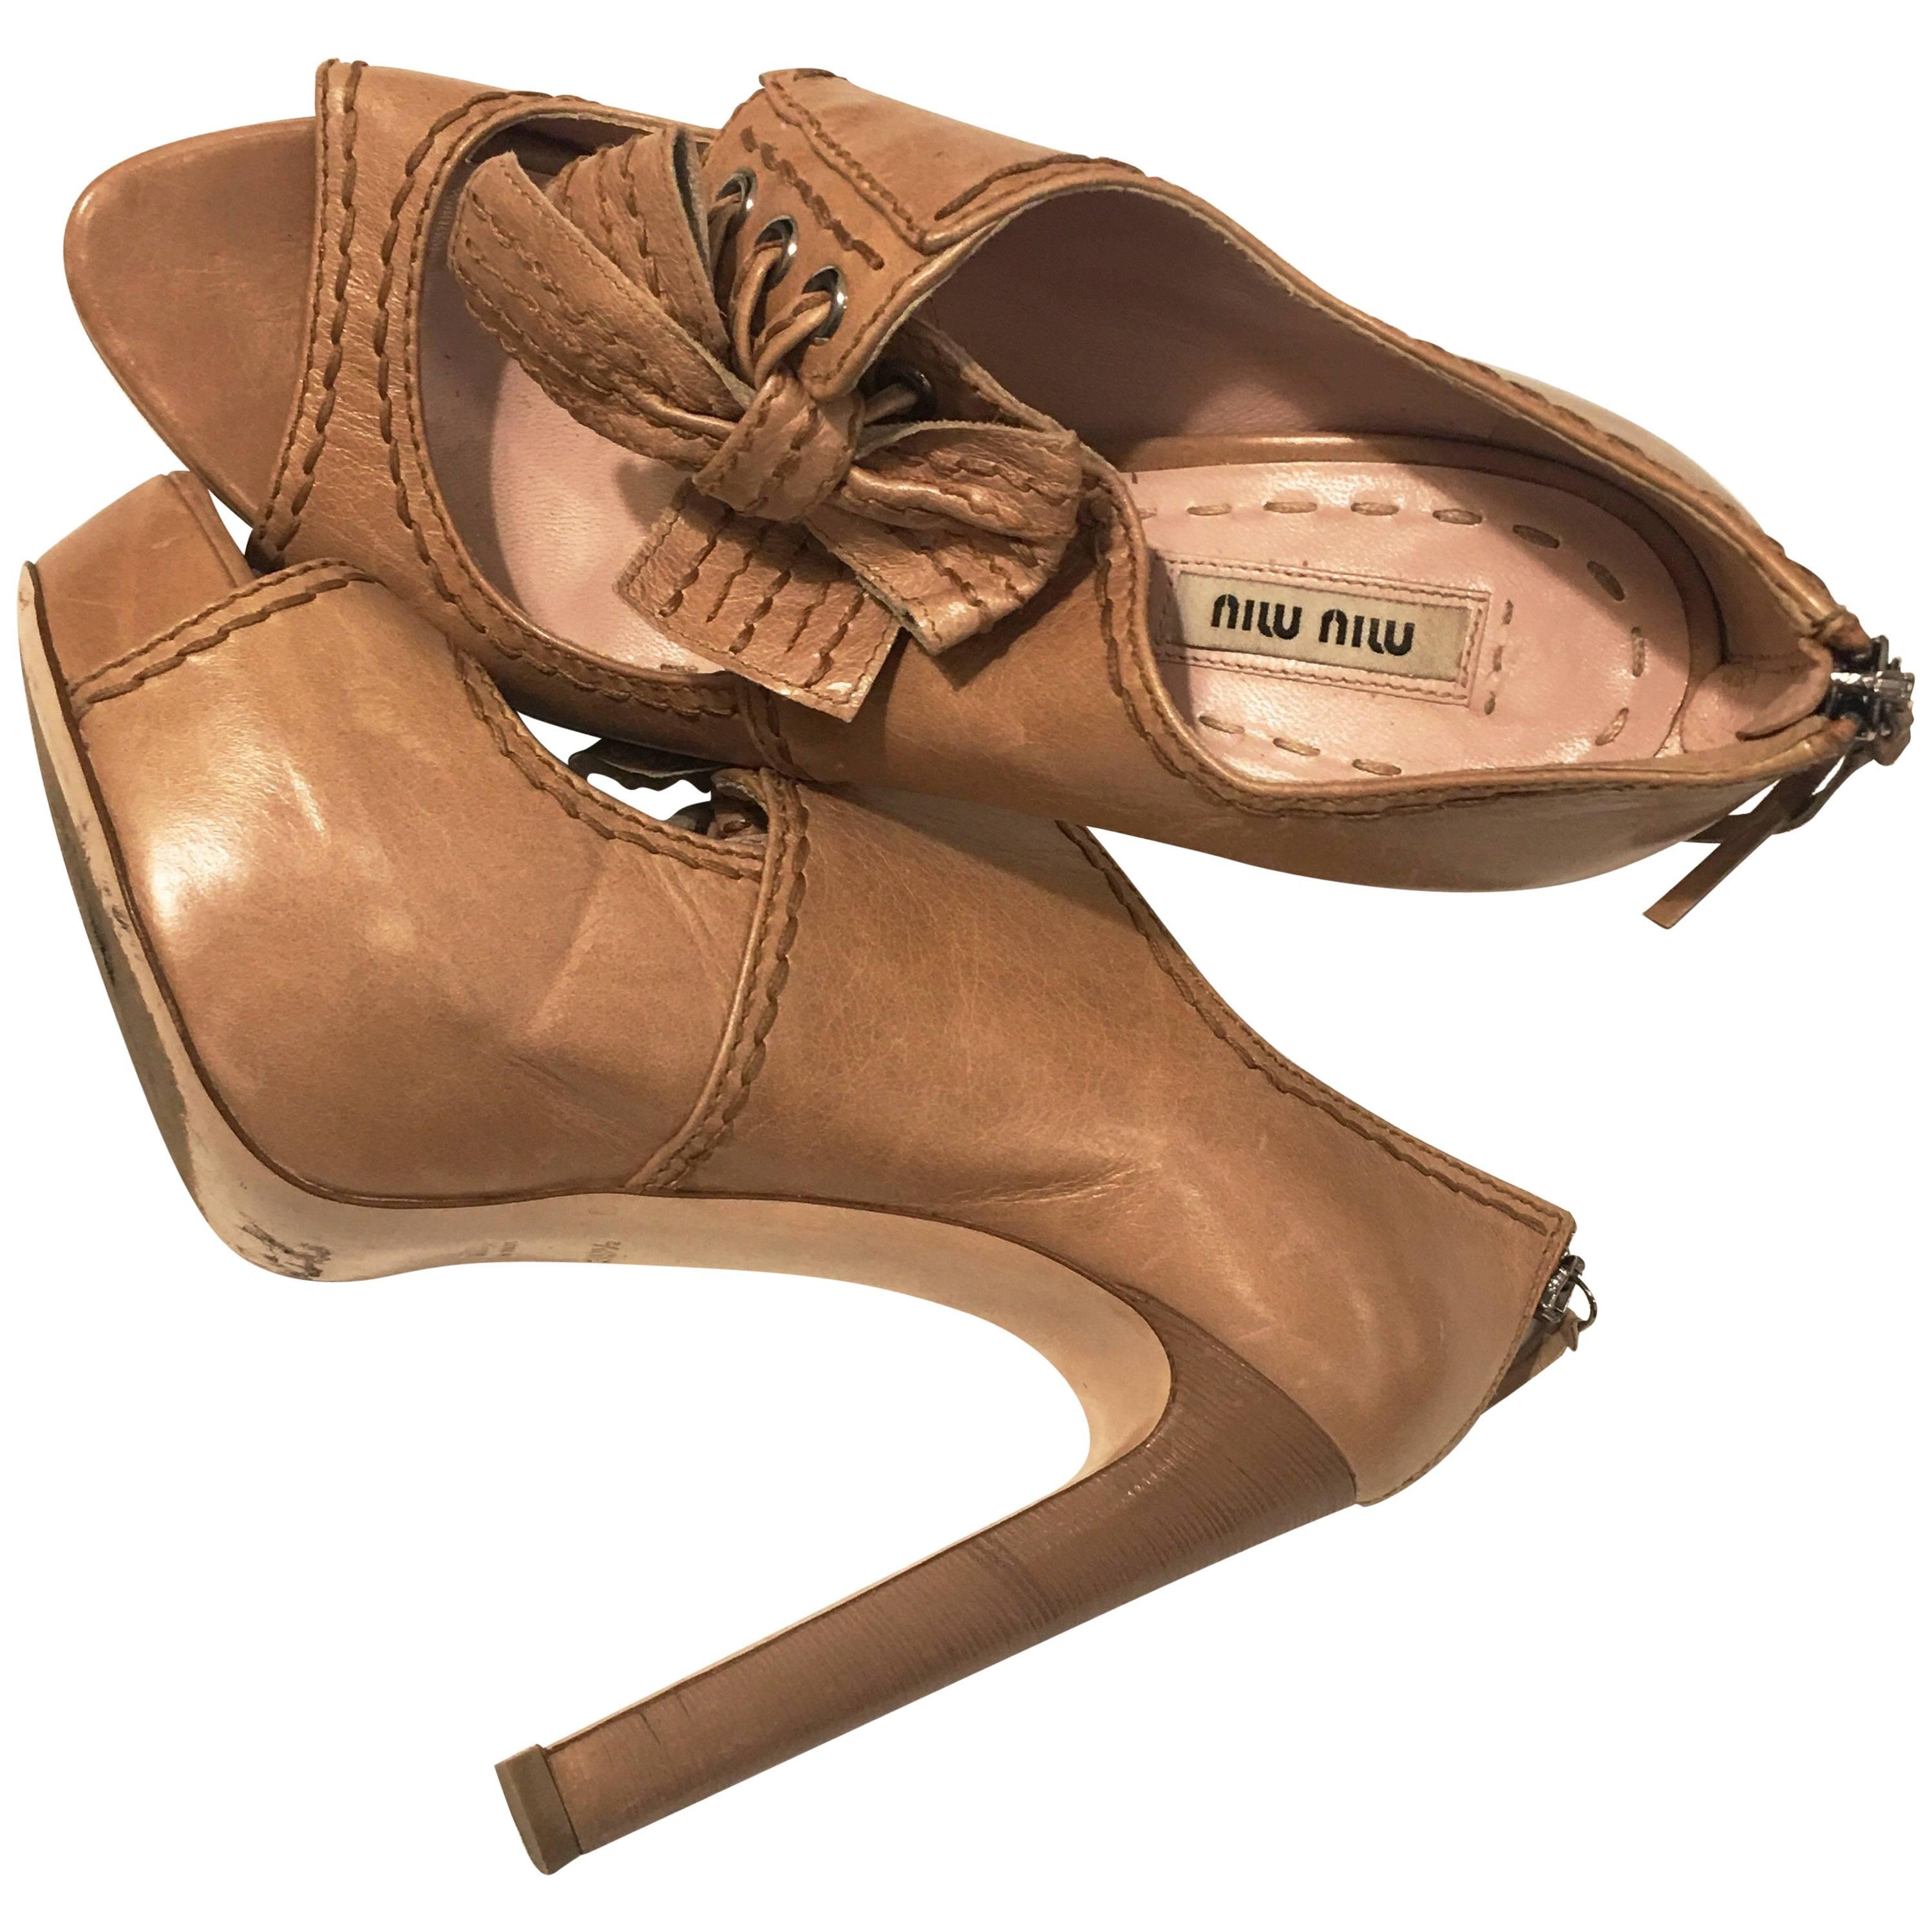 Miu Miu Beige “Mary Jane” Open Toe with Bow Pumps For Sale